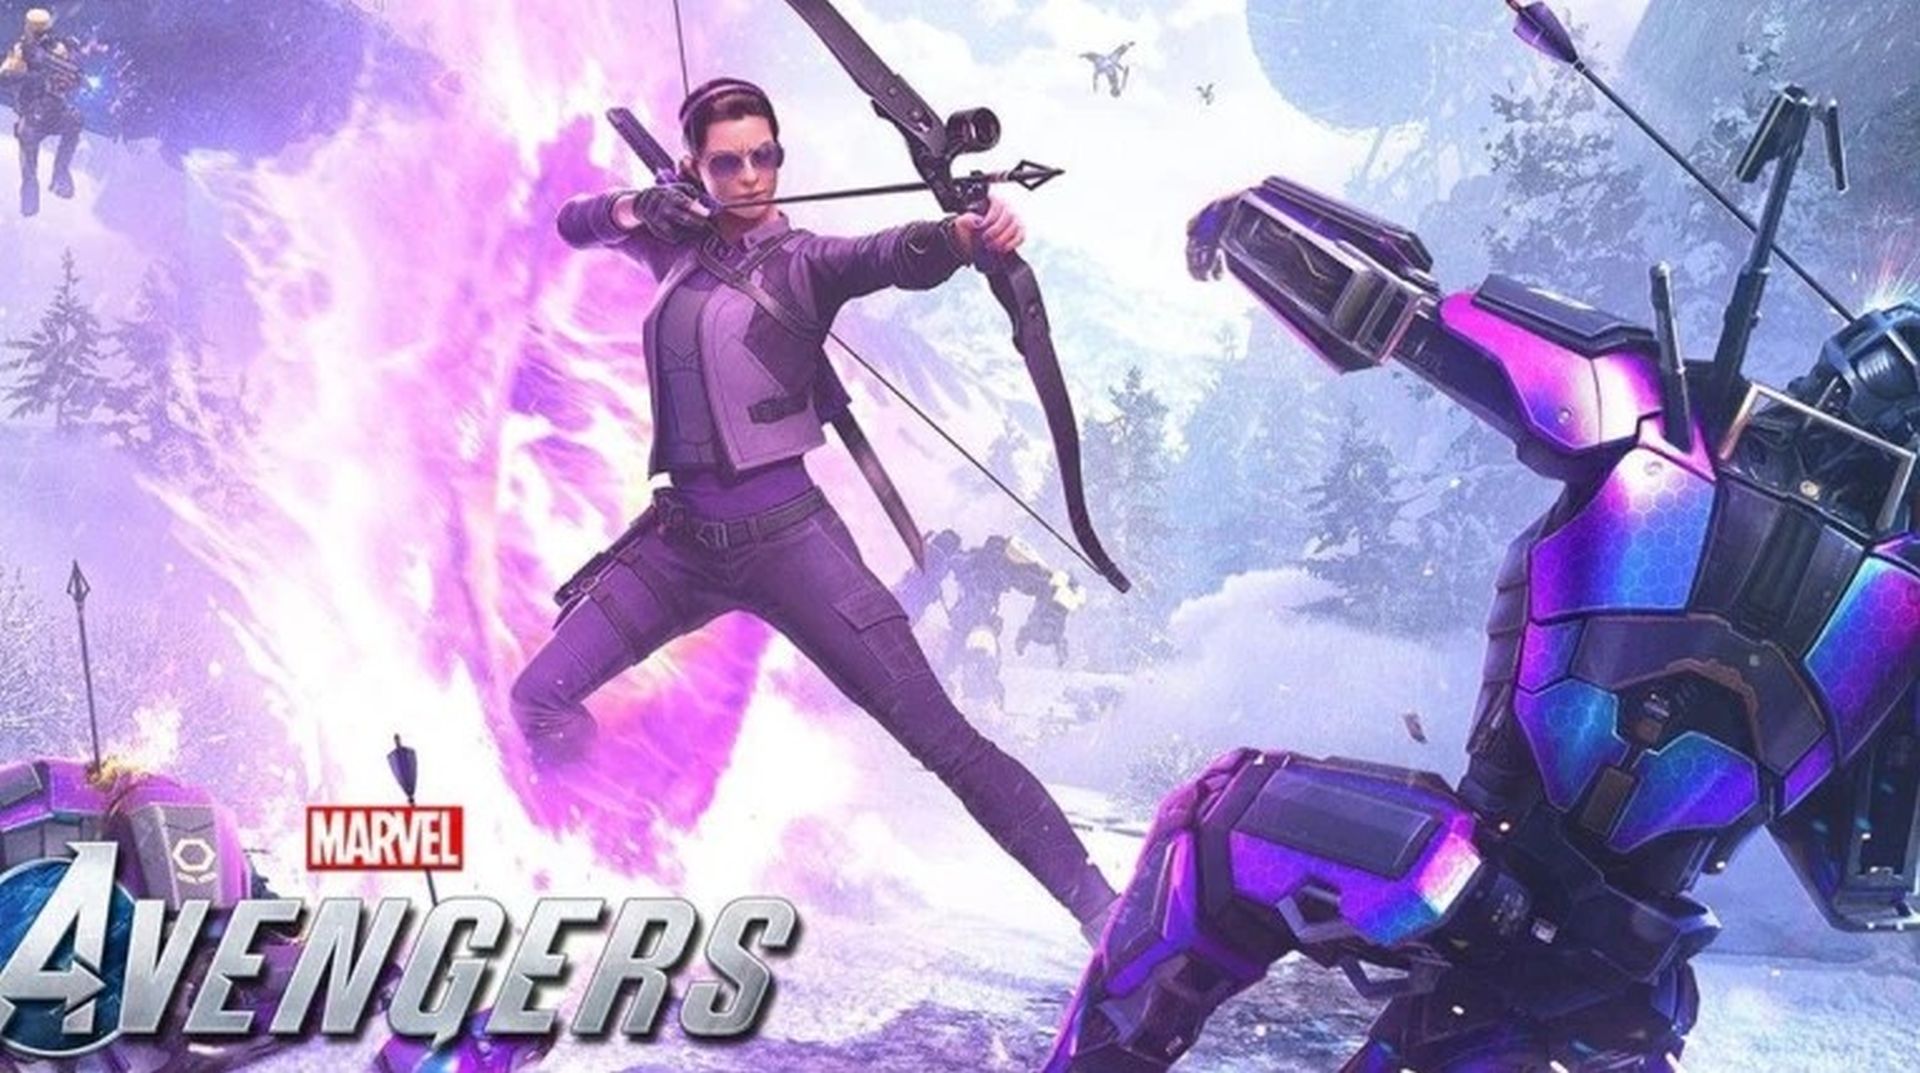 Marvel’s Avengers – Kate Bishop Joins As Post Launch Hero